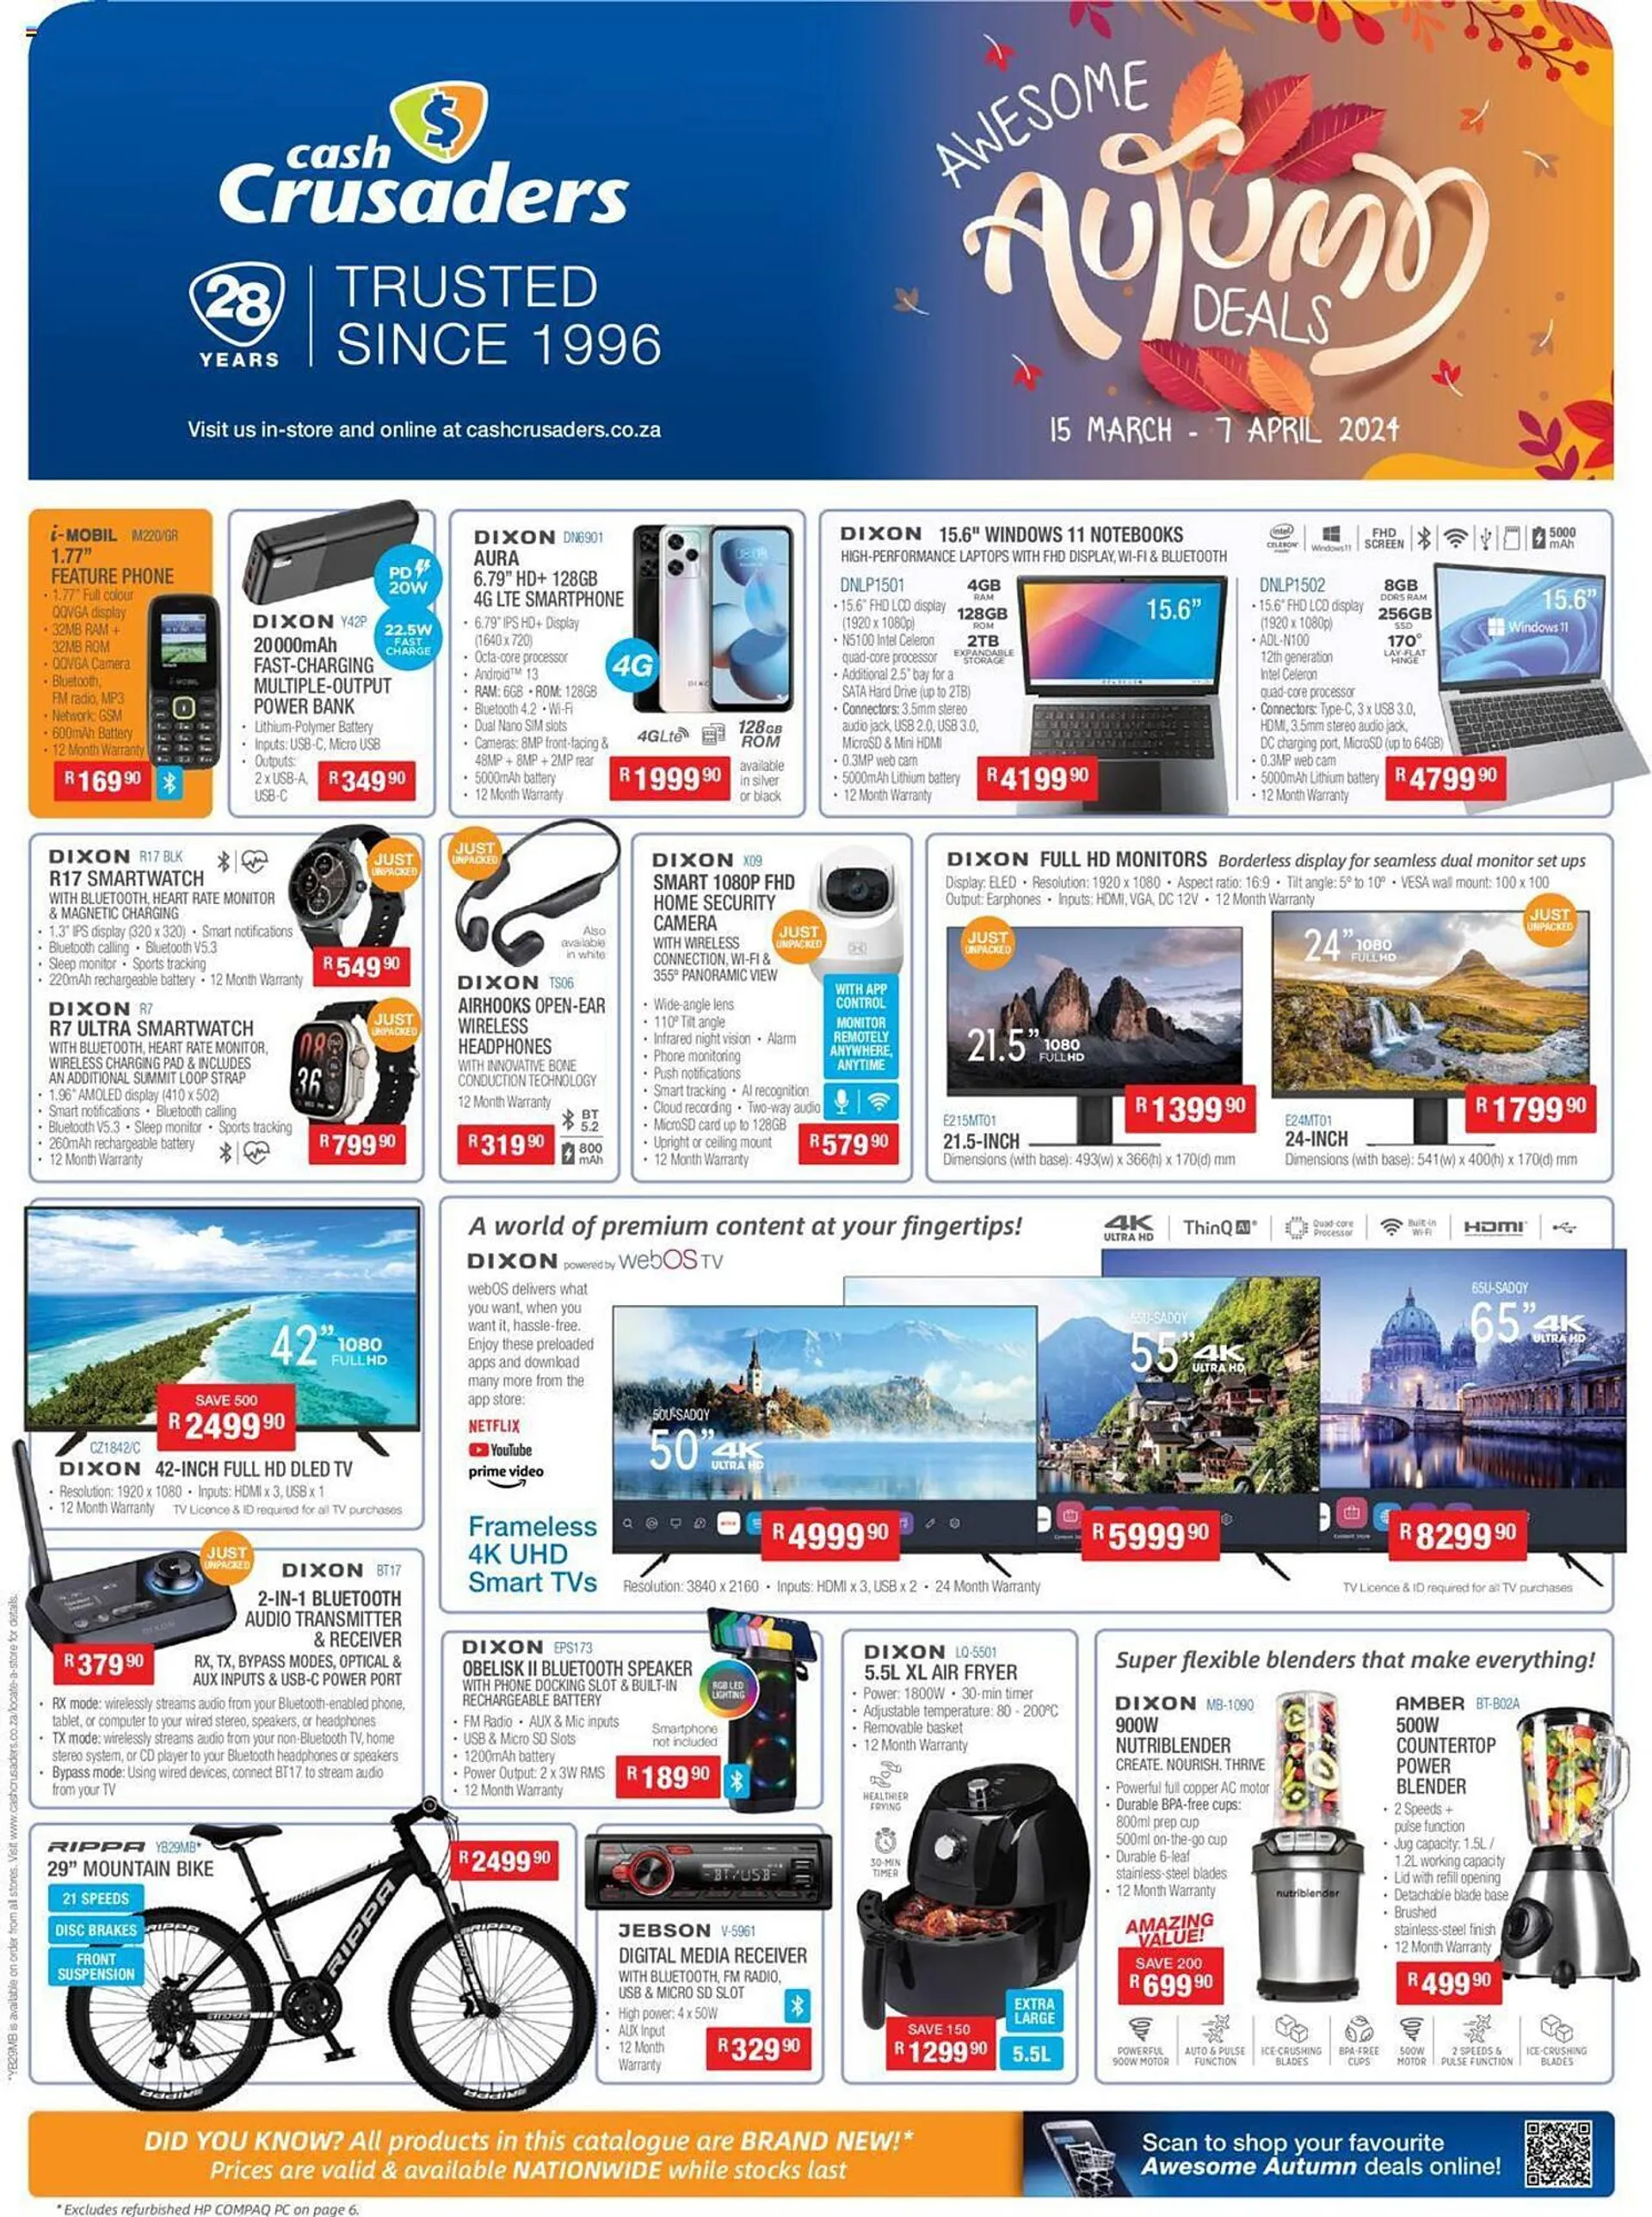 Cash Crusaders catalogue - 15 March 7 April 2024 - Page 1